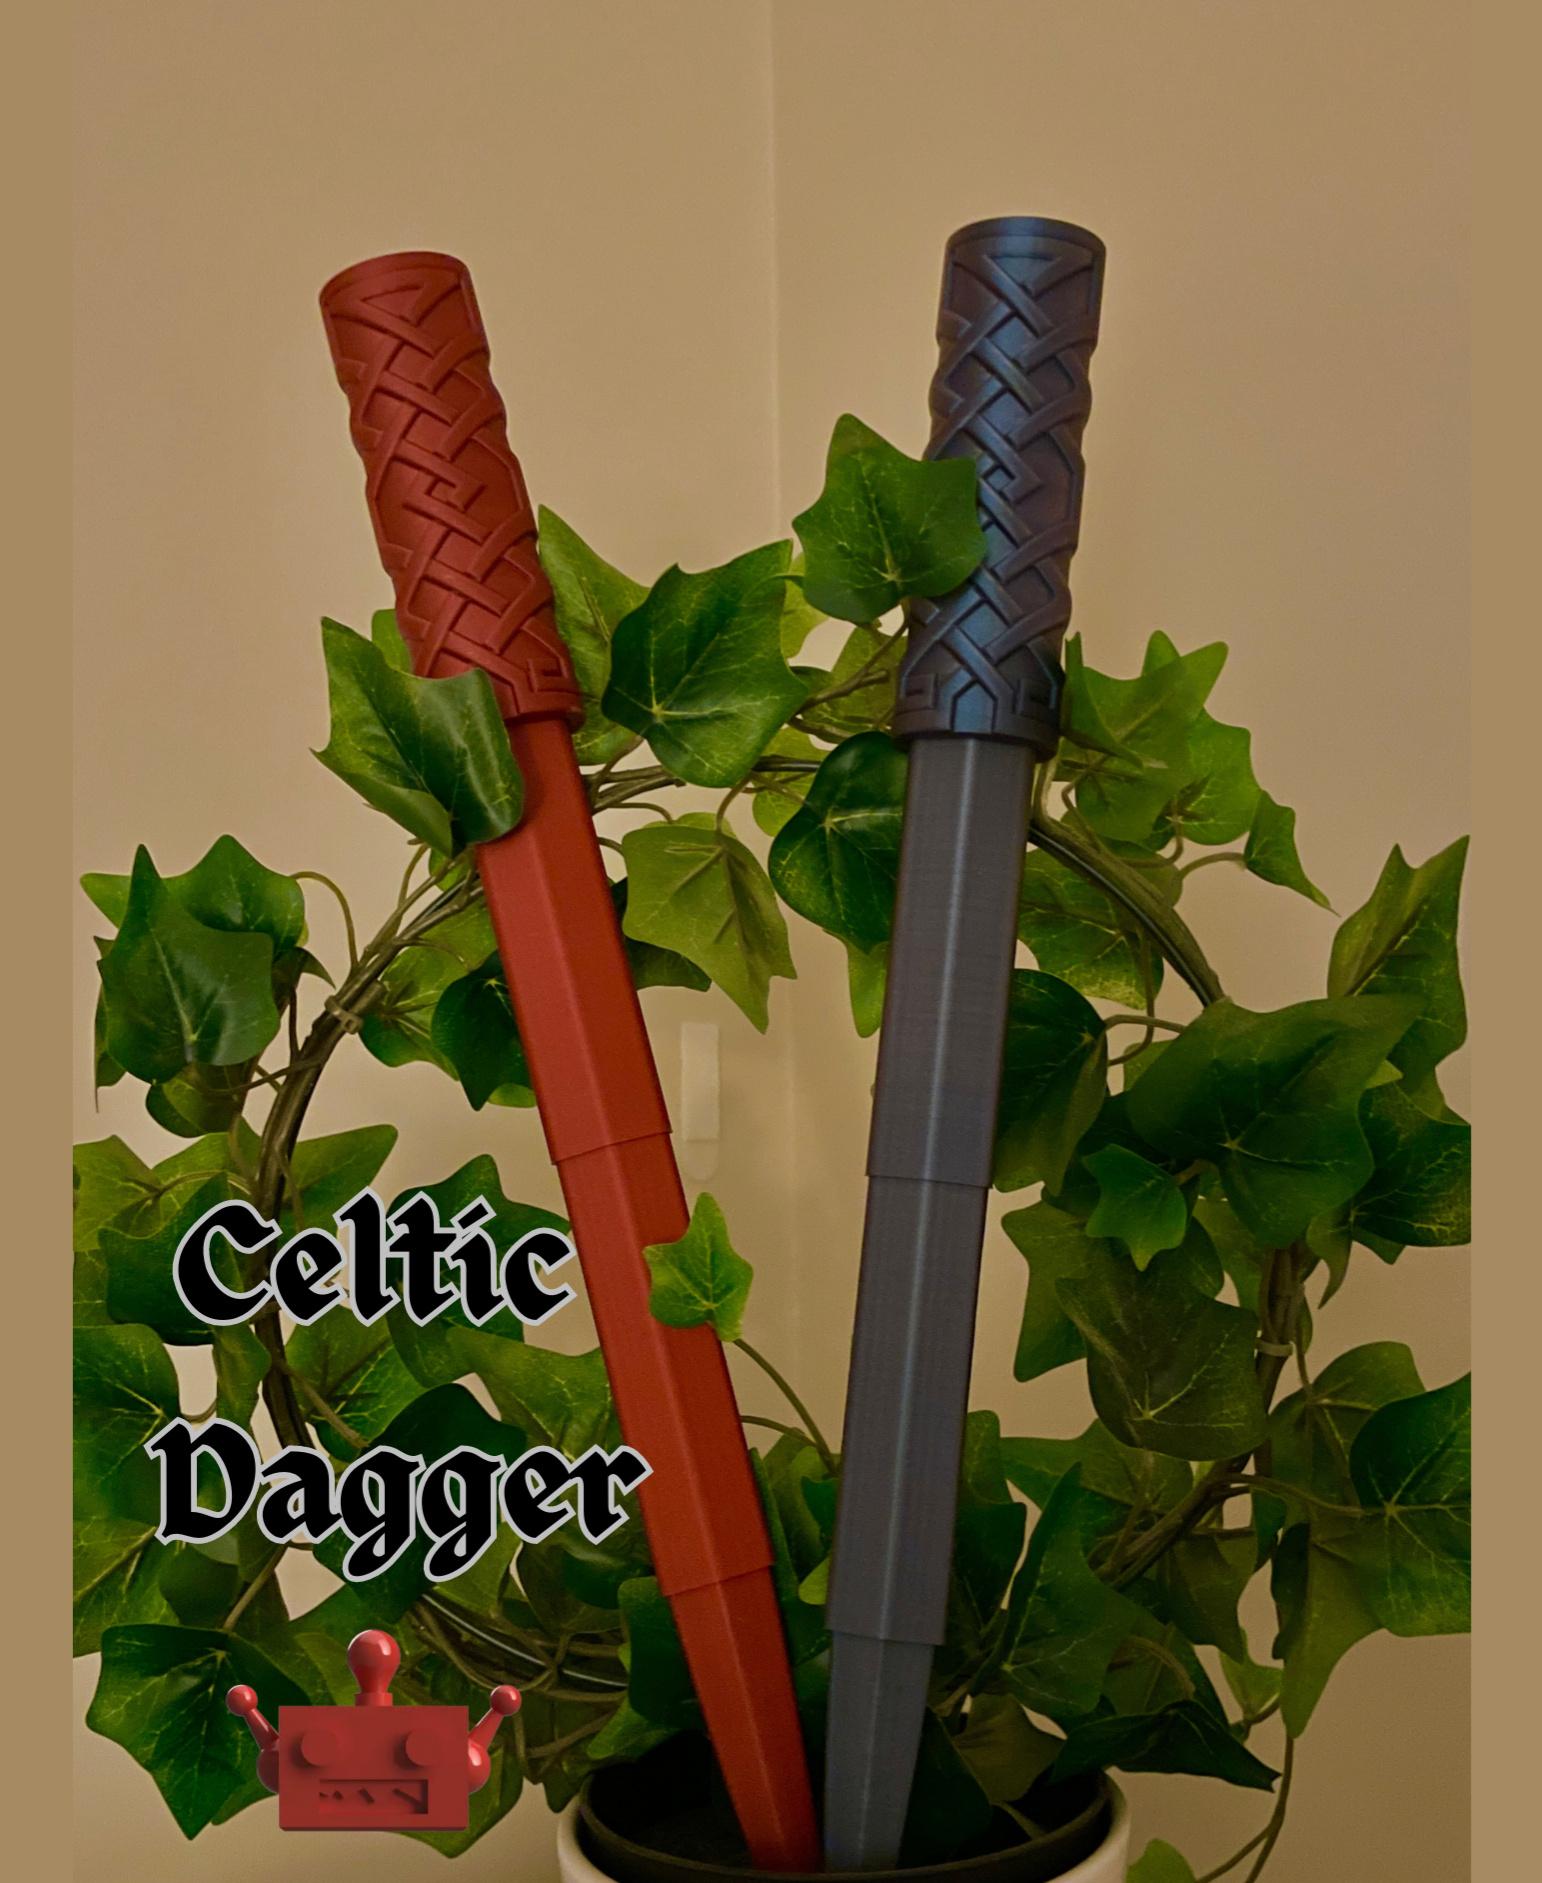 Collapsing Celtic Dagger  - Polymaker Metallic Red and Starlight Twilight - 3d model